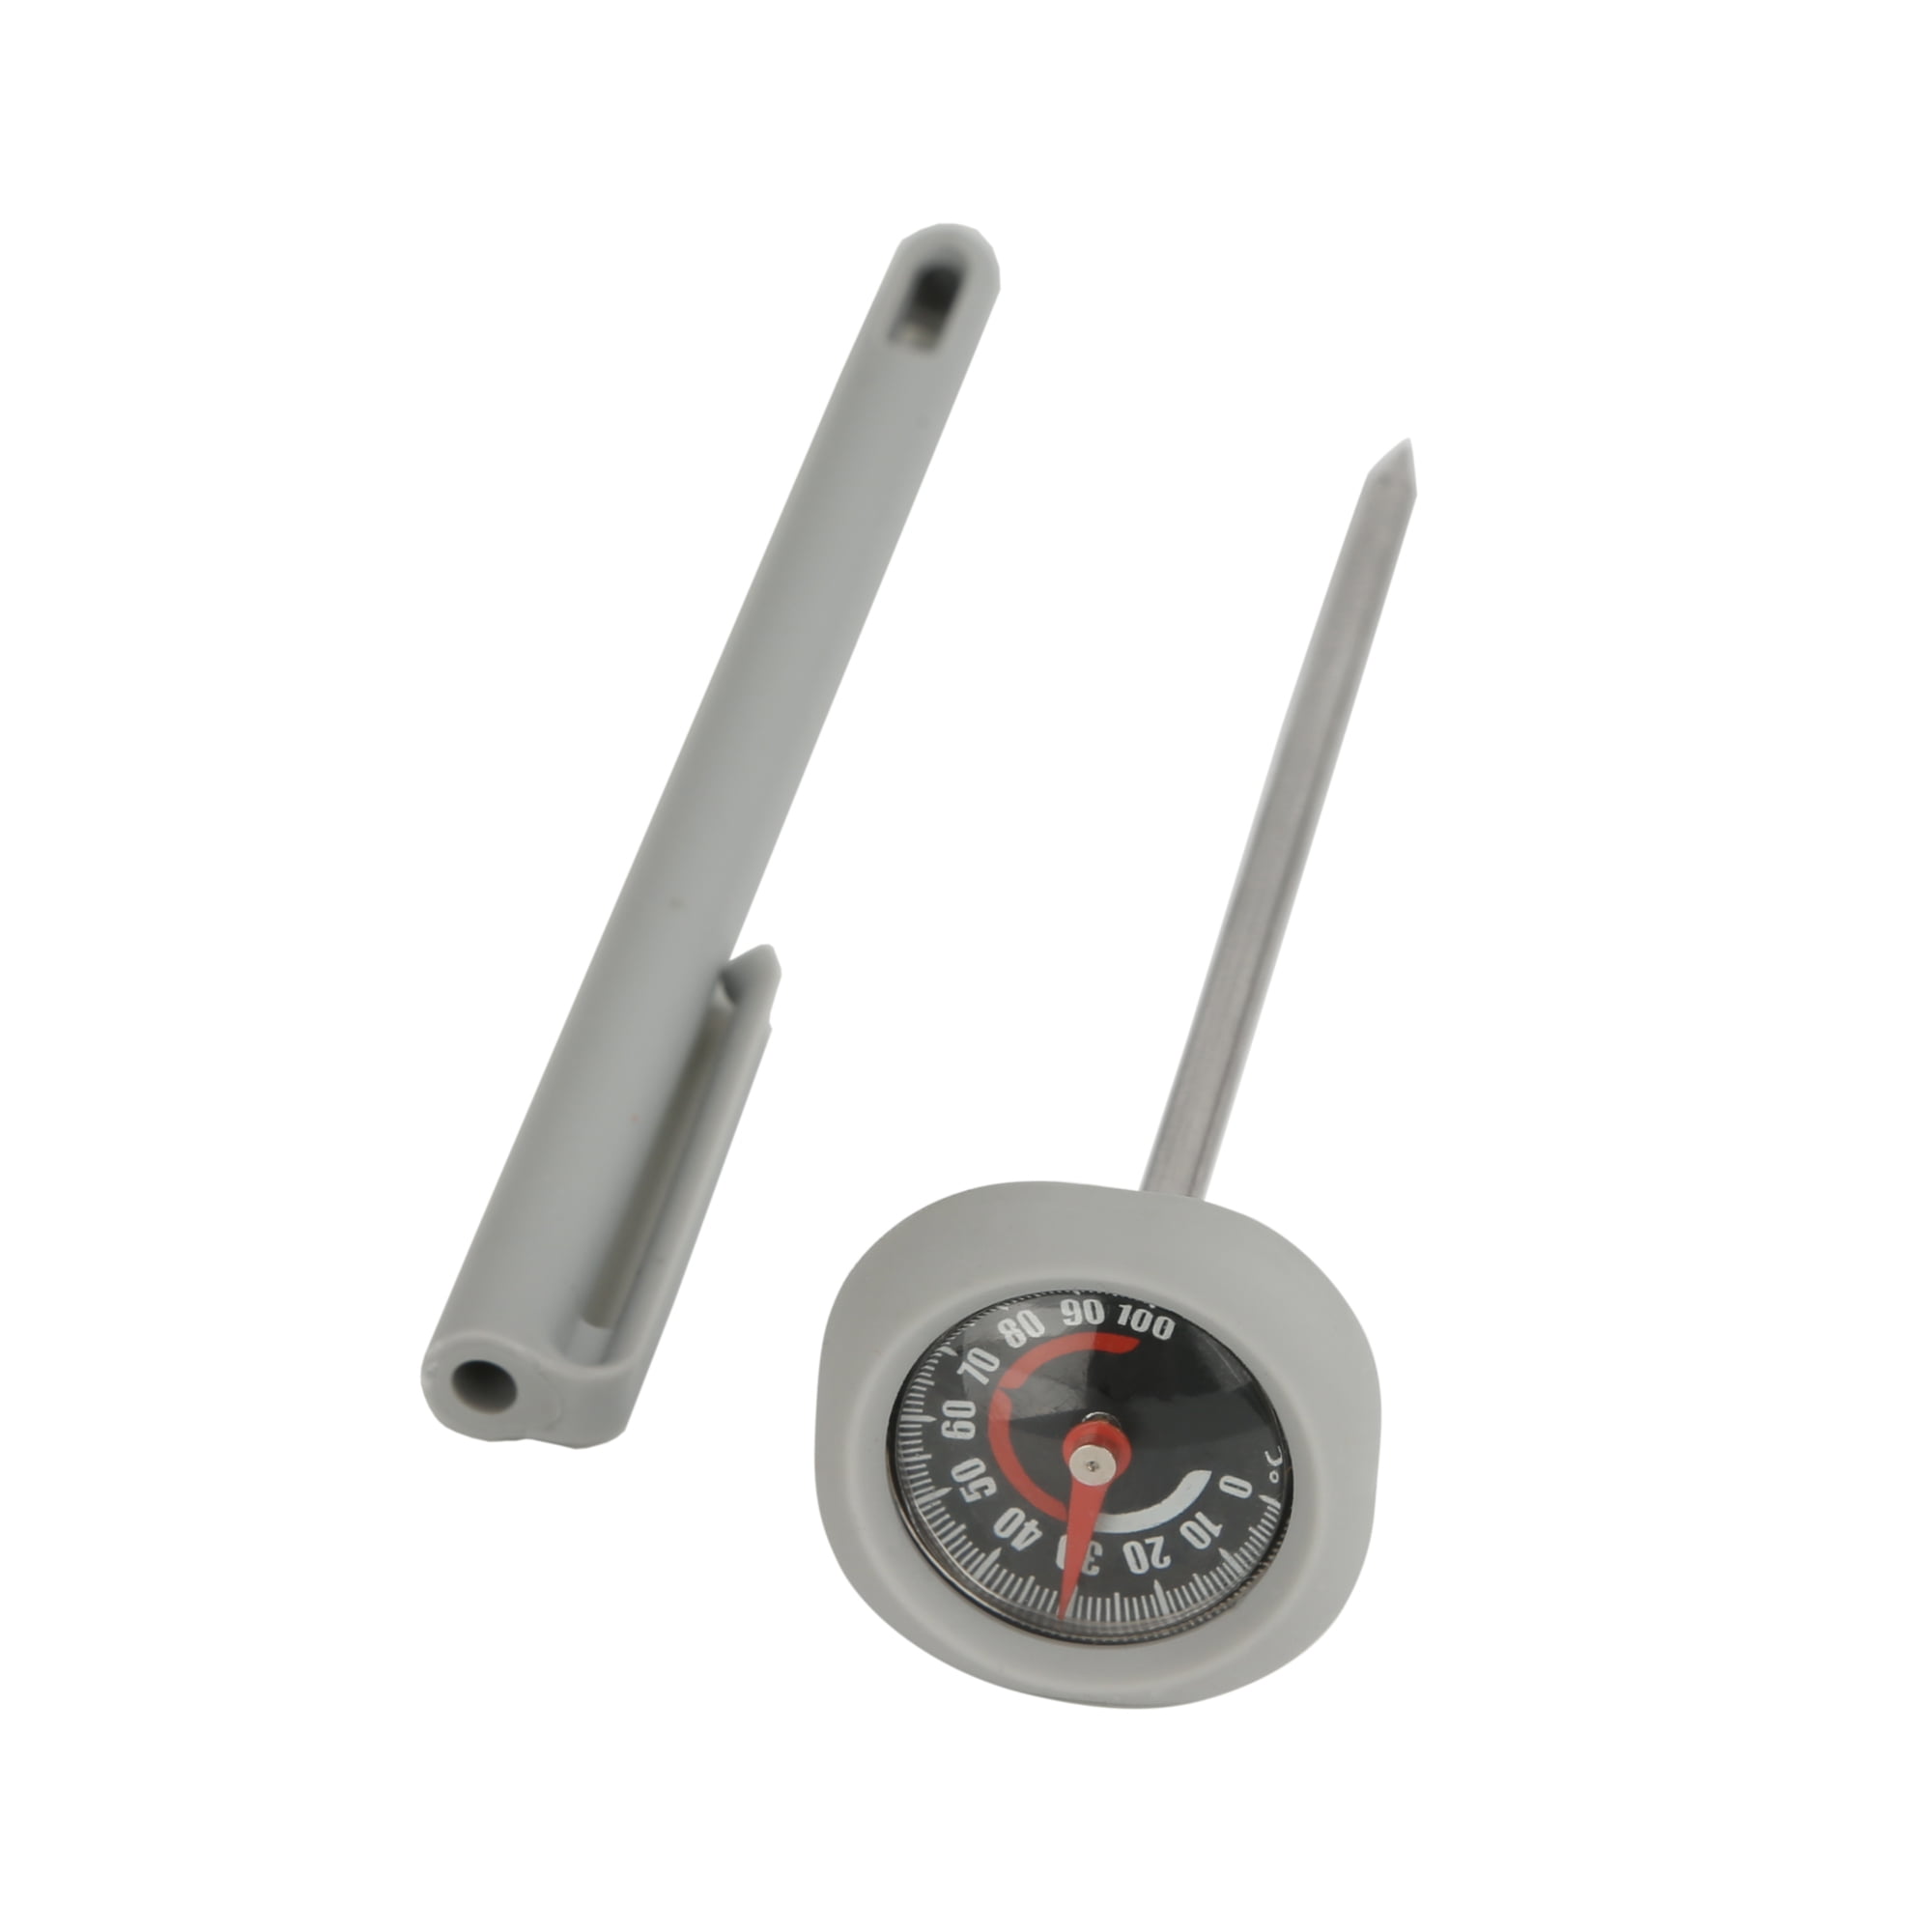 Mainstays Meat Thermometer Stainless Steel T731 Oven Safe